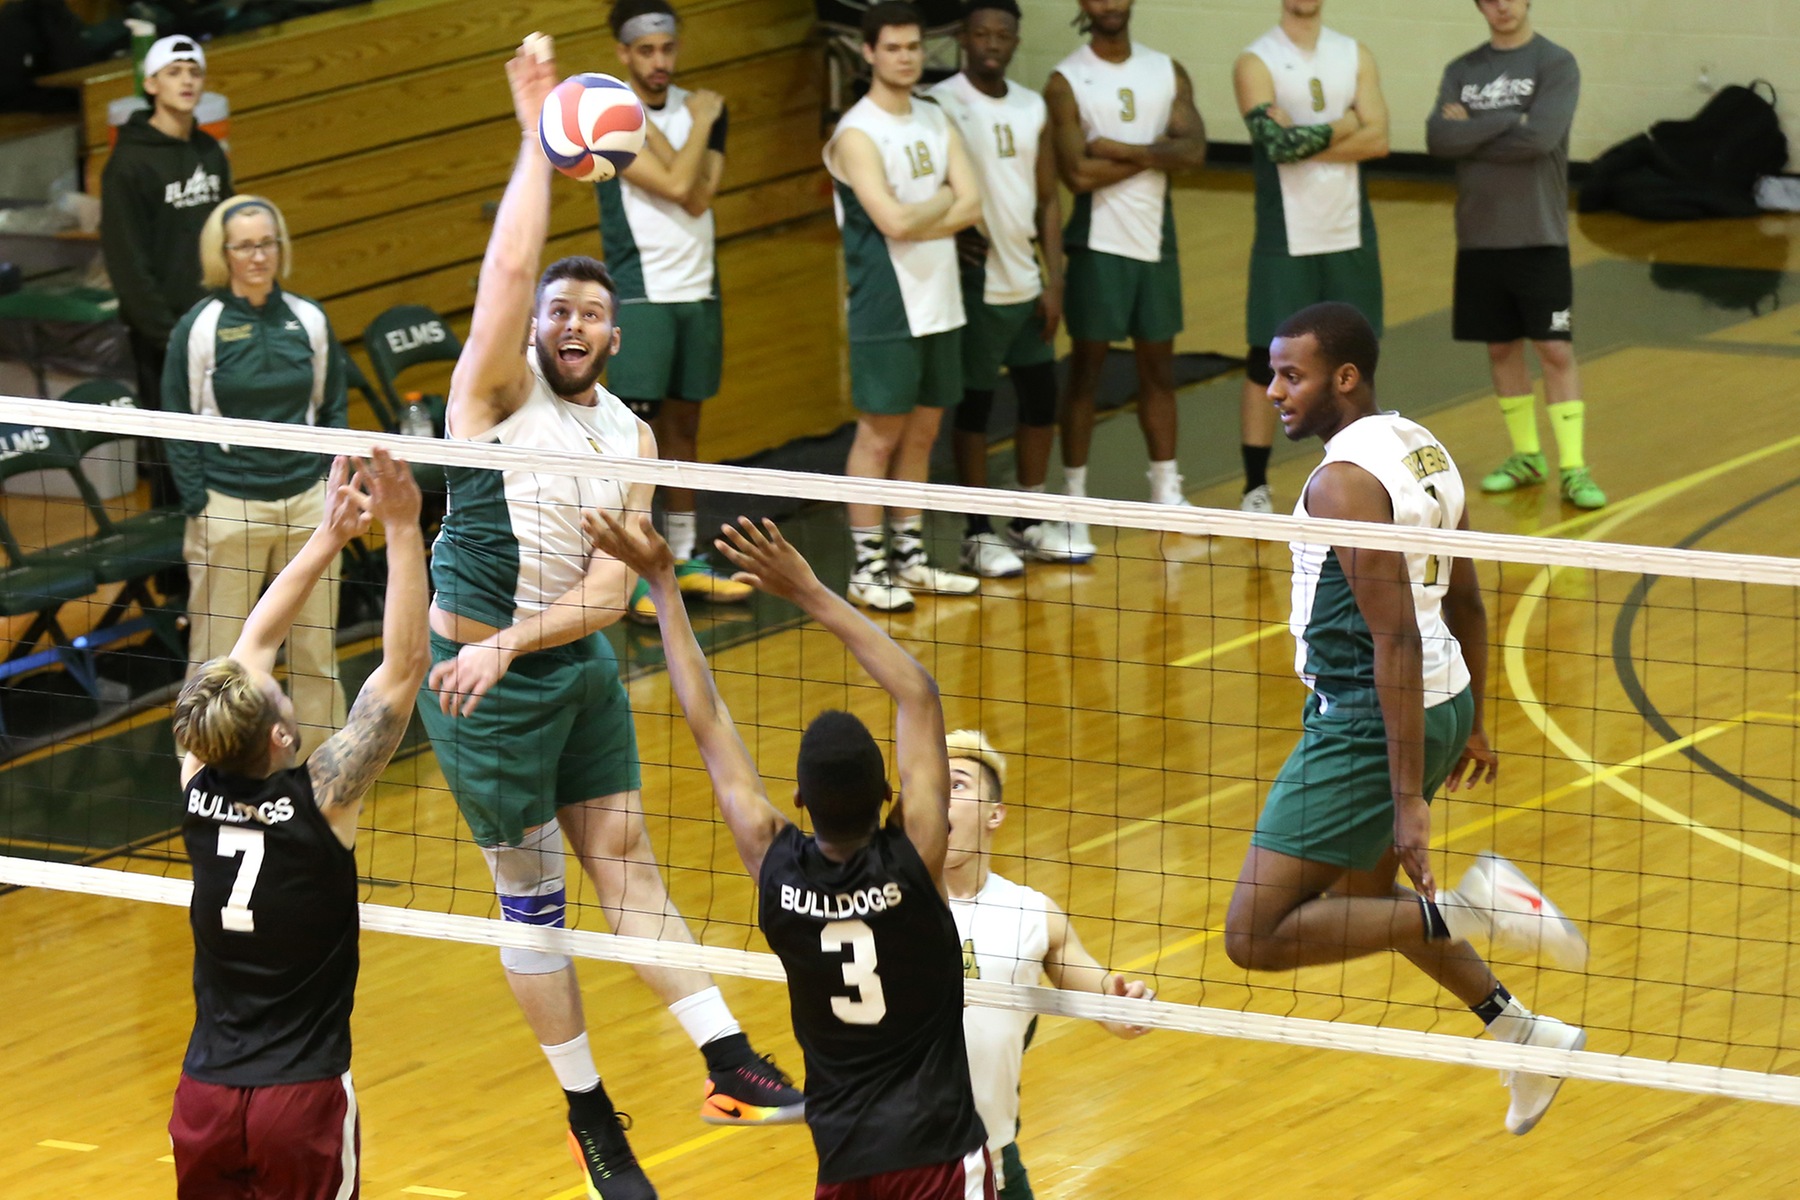 Men's Volleyball Punches Ticket To NECC Title Match